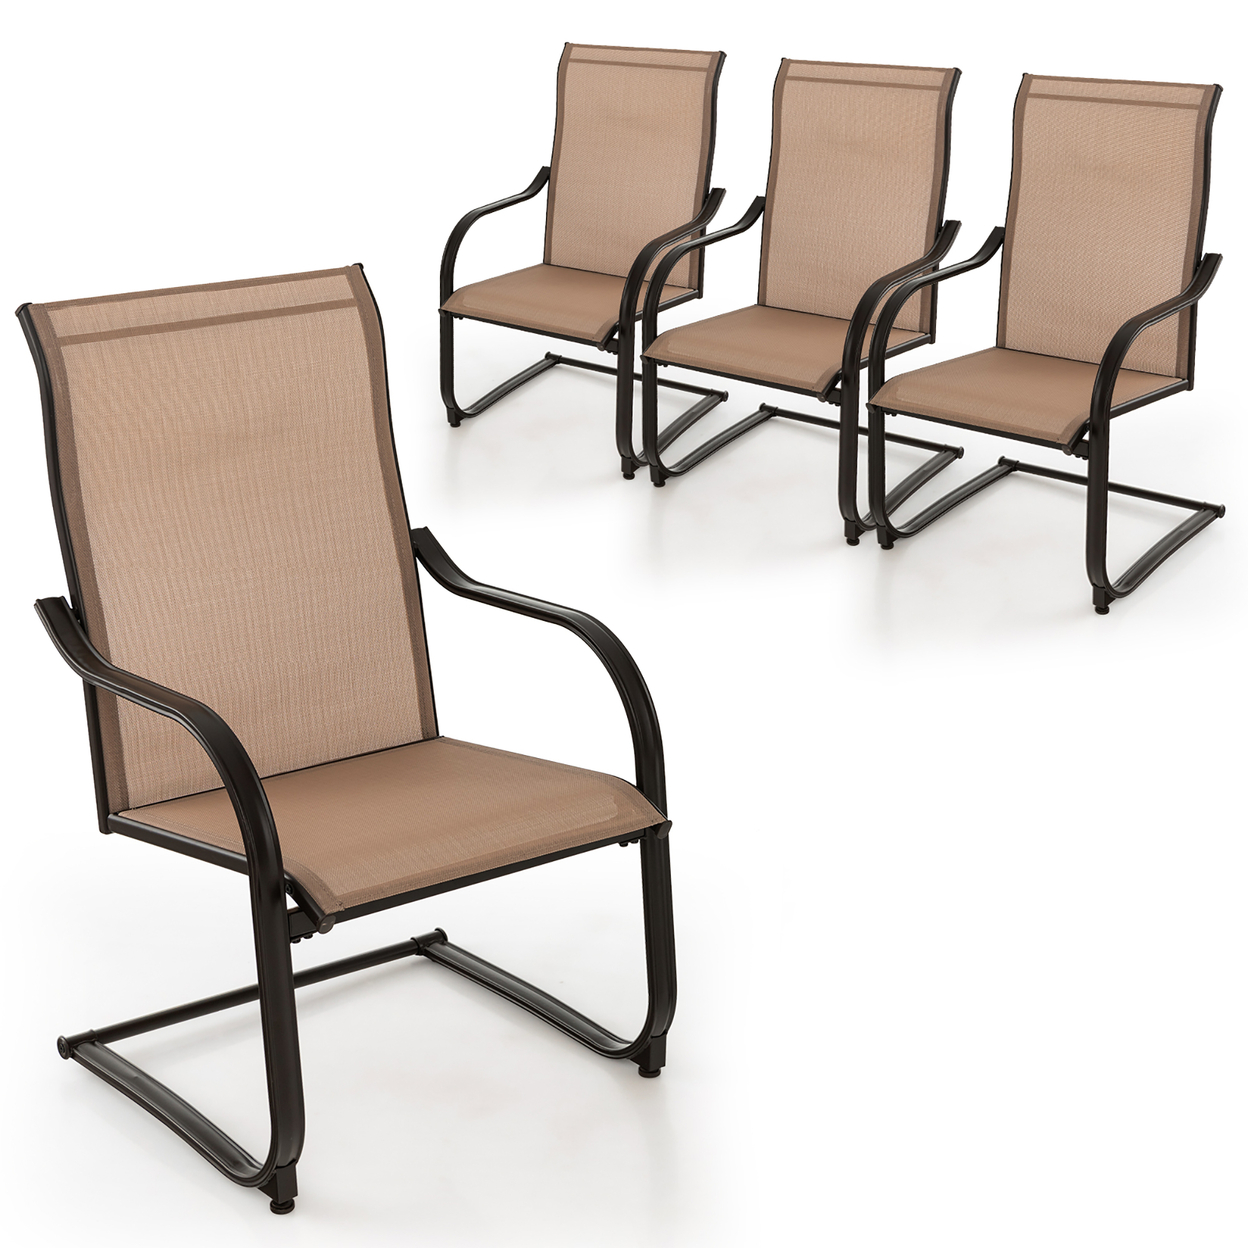 4PCS Outdoor Dining Chairs Patio C-Spring Motion W/ Cozy & Breathable Seat Fabric